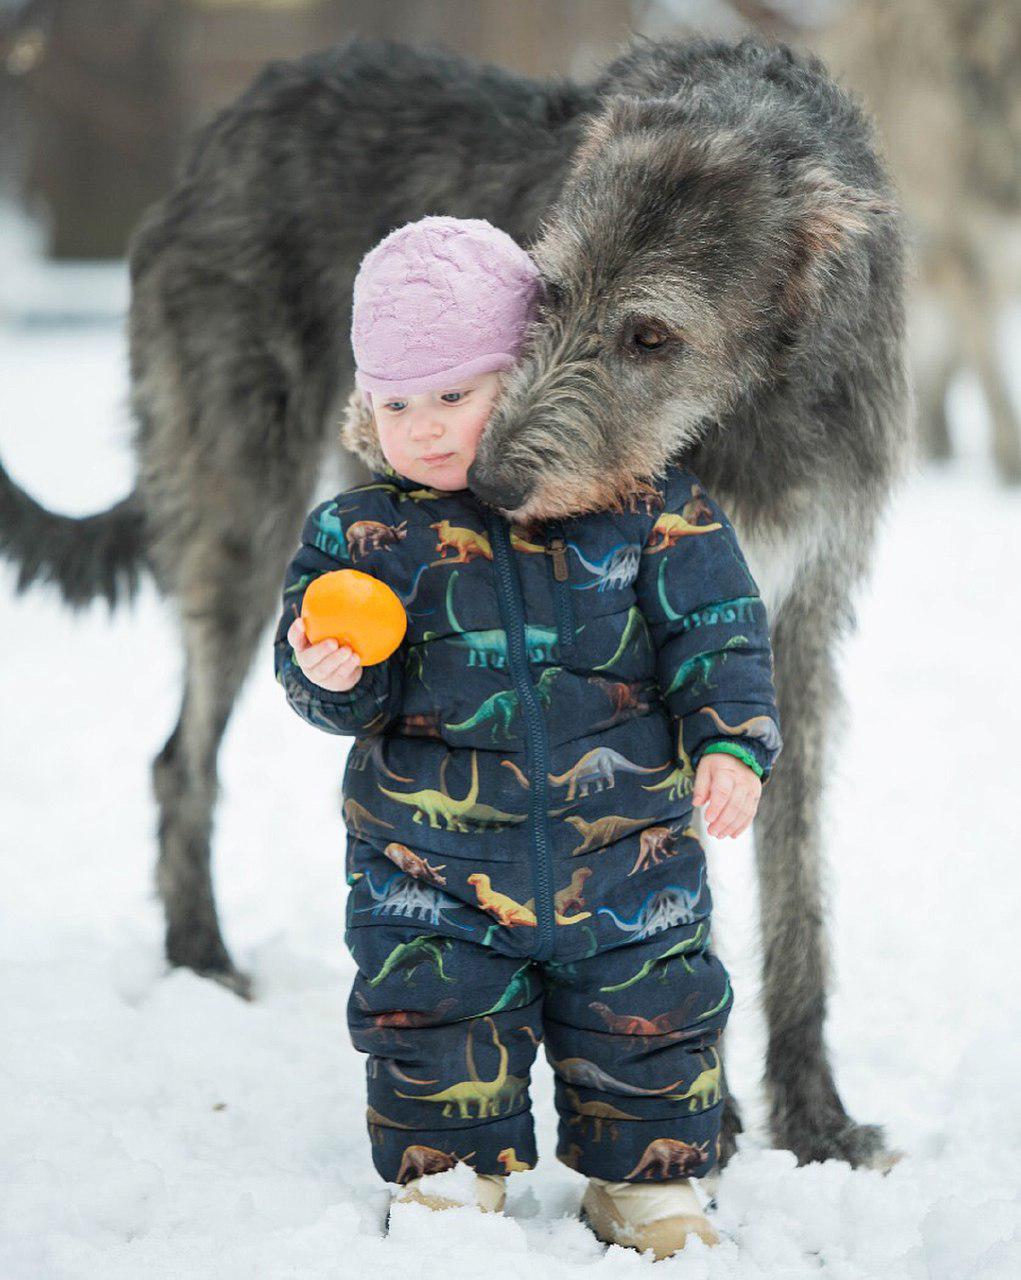 Irish Wolfhound dog with a child outside in snow